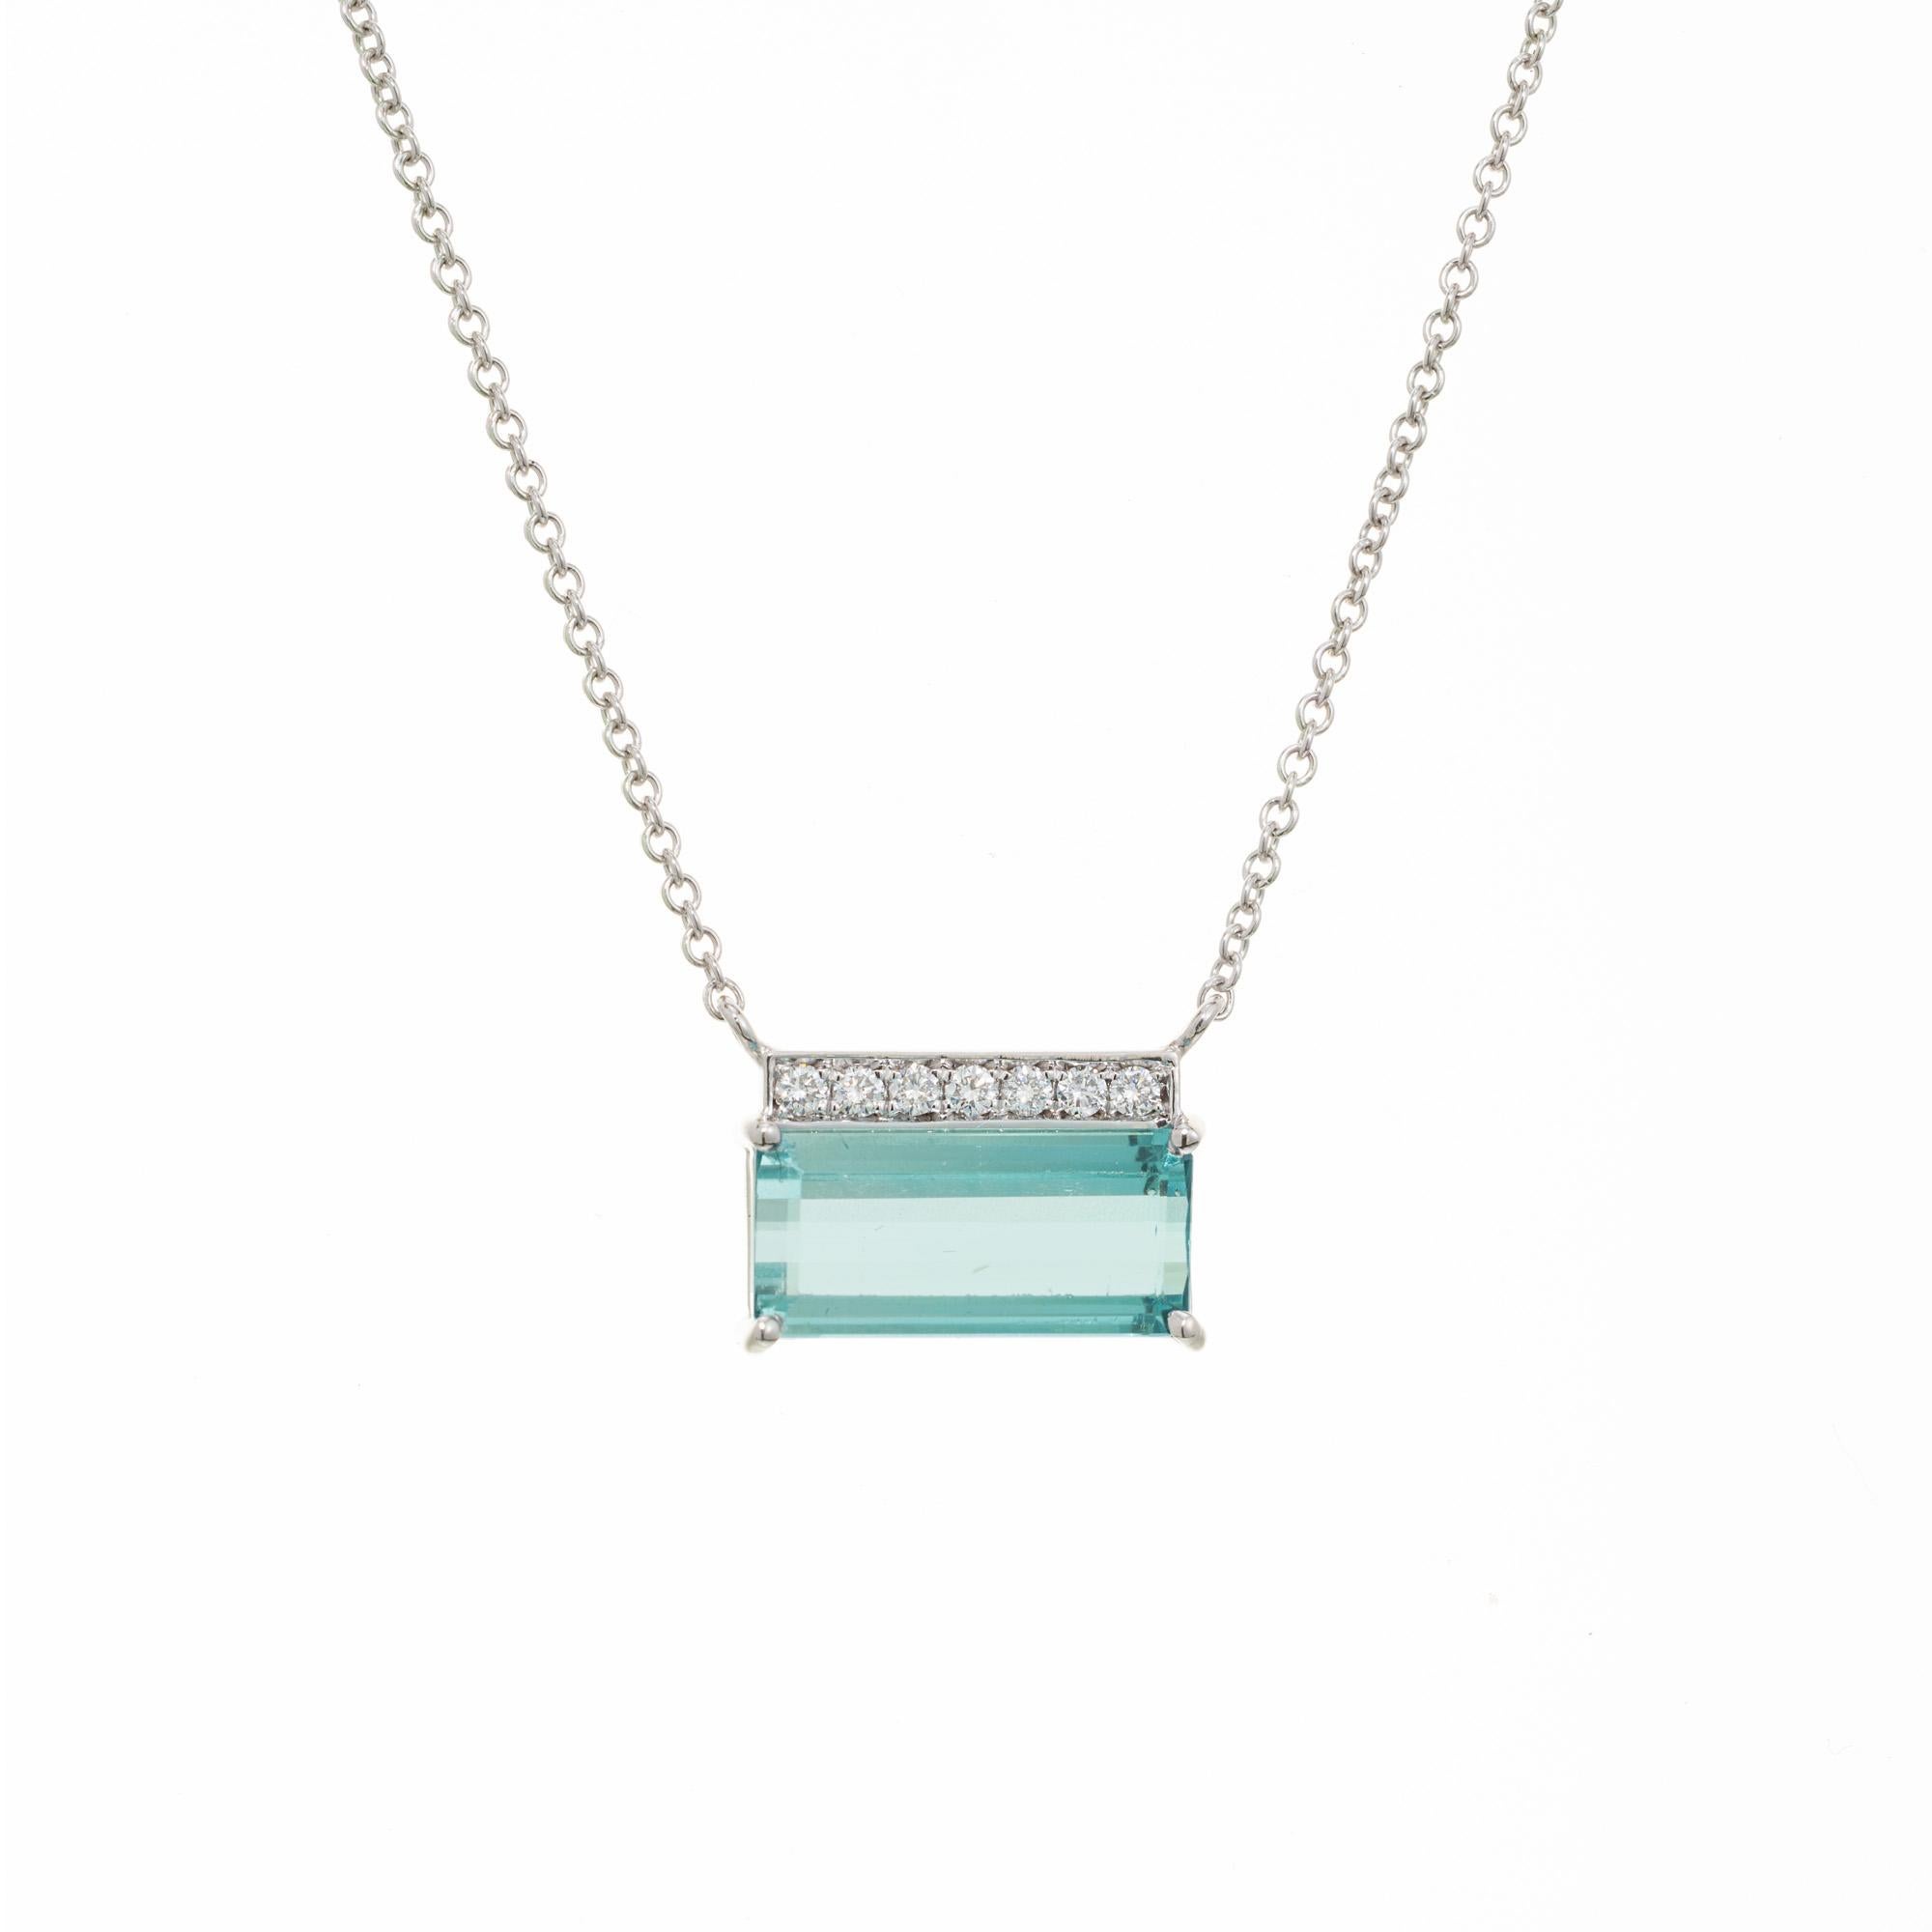 Aquamarine and diamond pendant necklace. 3.60ct rectangle shape Aqua mounted sideways in a 14k white gold setting, accented with a row of 7 round brilliant cut diamonds along the top frame of the setting with an 18.5 inch chain. The aqua is a bluish